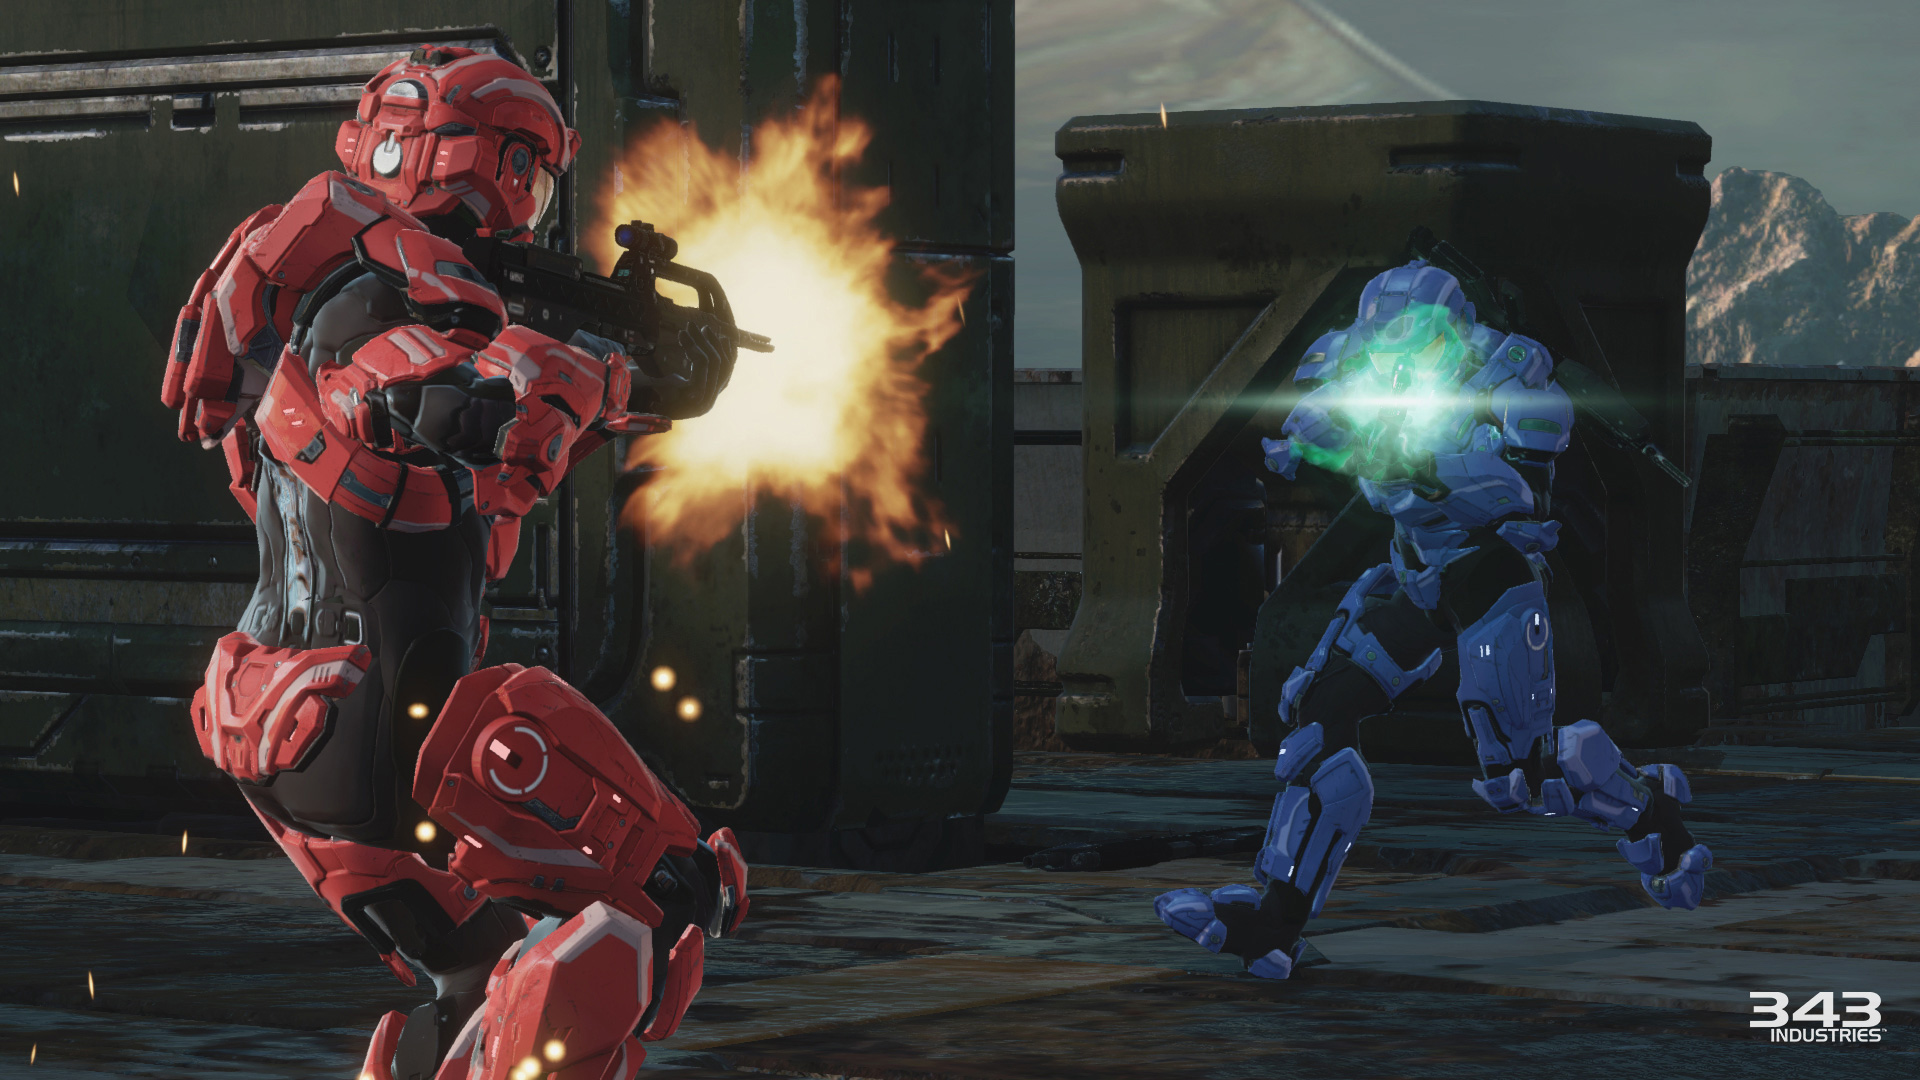 Halo: The Master Chief Collection | Games | Halo - Official Site